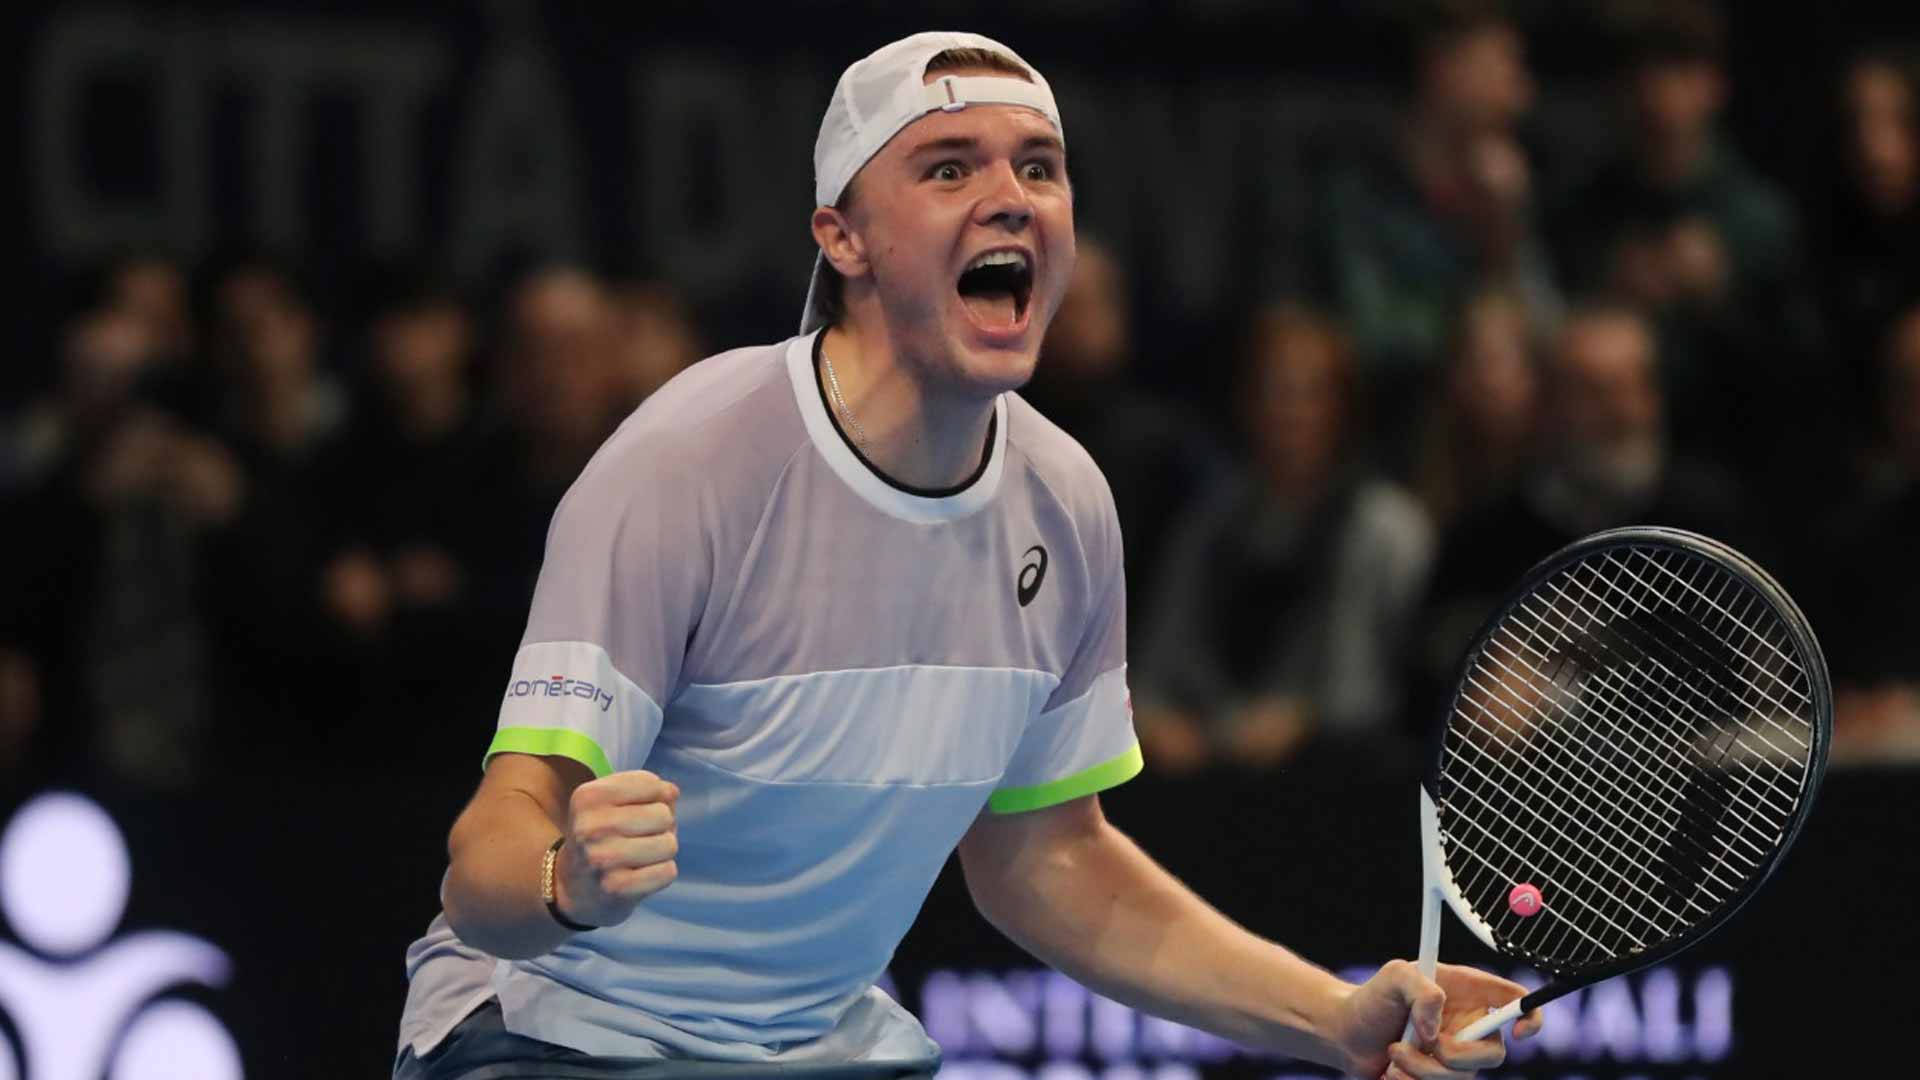 <a href='https://www.atptour.com/en/players/dominic-stricker/s0la/overview'>Dominic Stricker</a> triumphs at the Challenger 75 event in Rovereto, Italy.